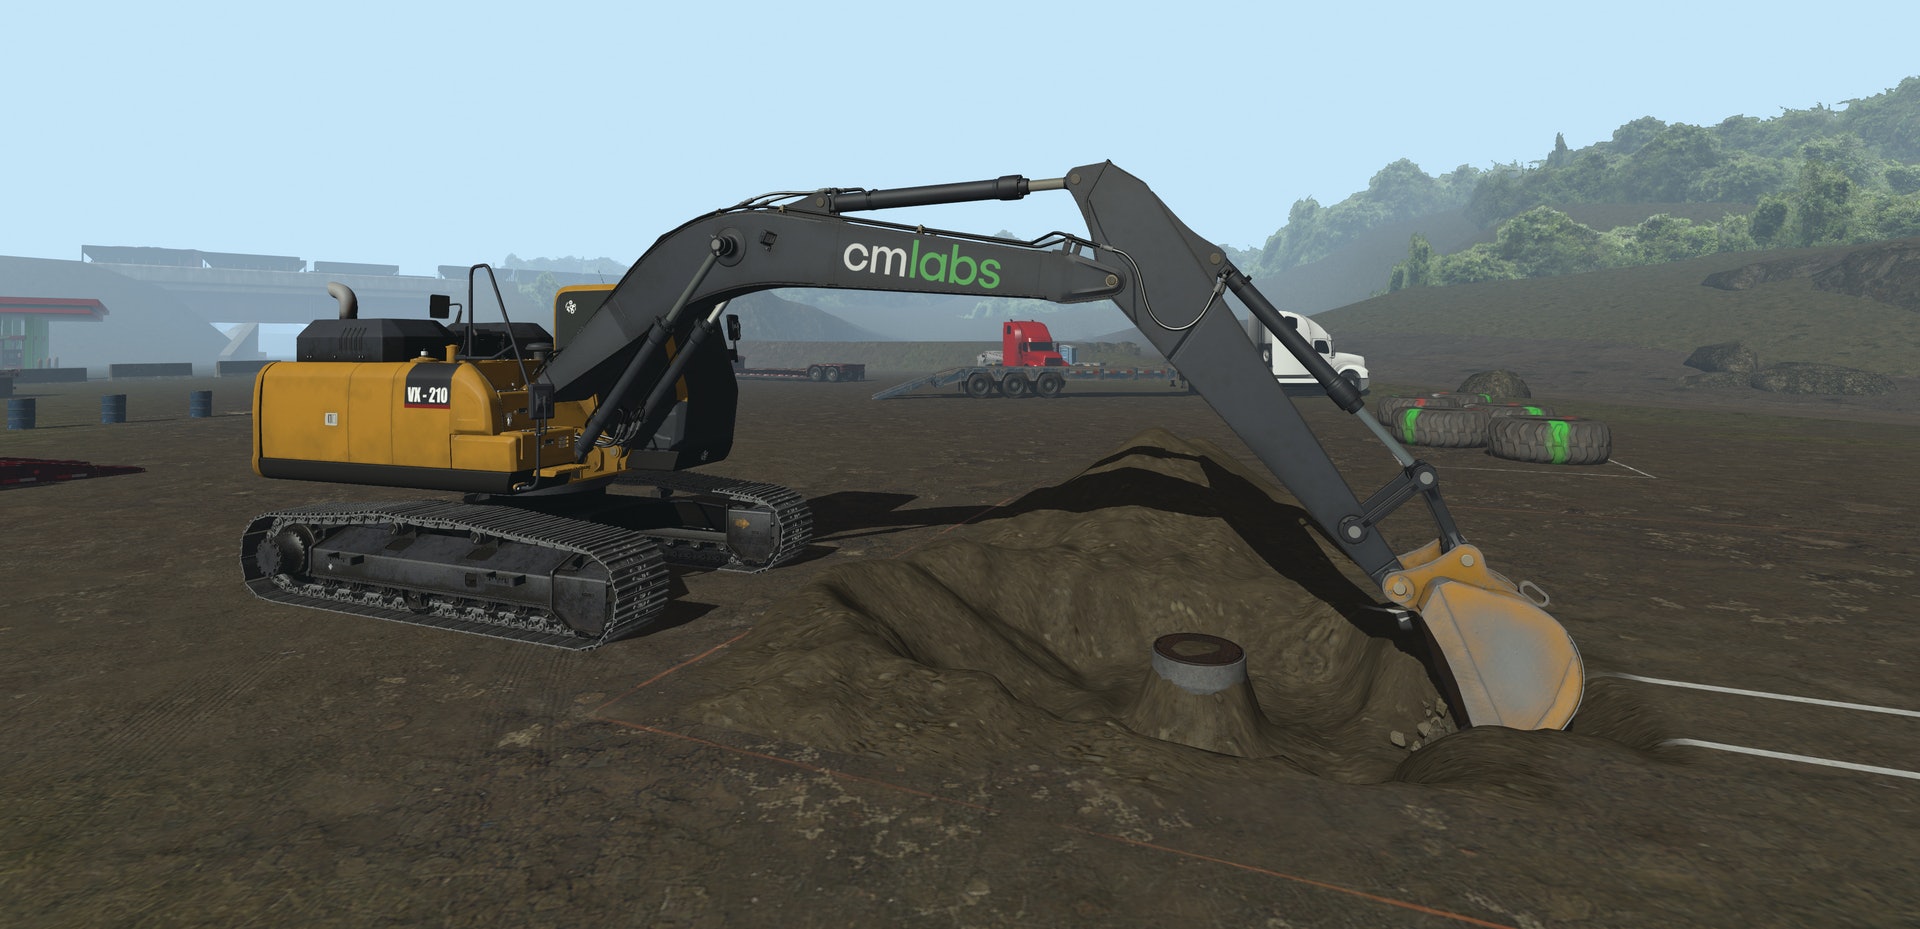 Sleipner announces new Excavator Simulators to reduce training costs by 66  percent - Highways Today